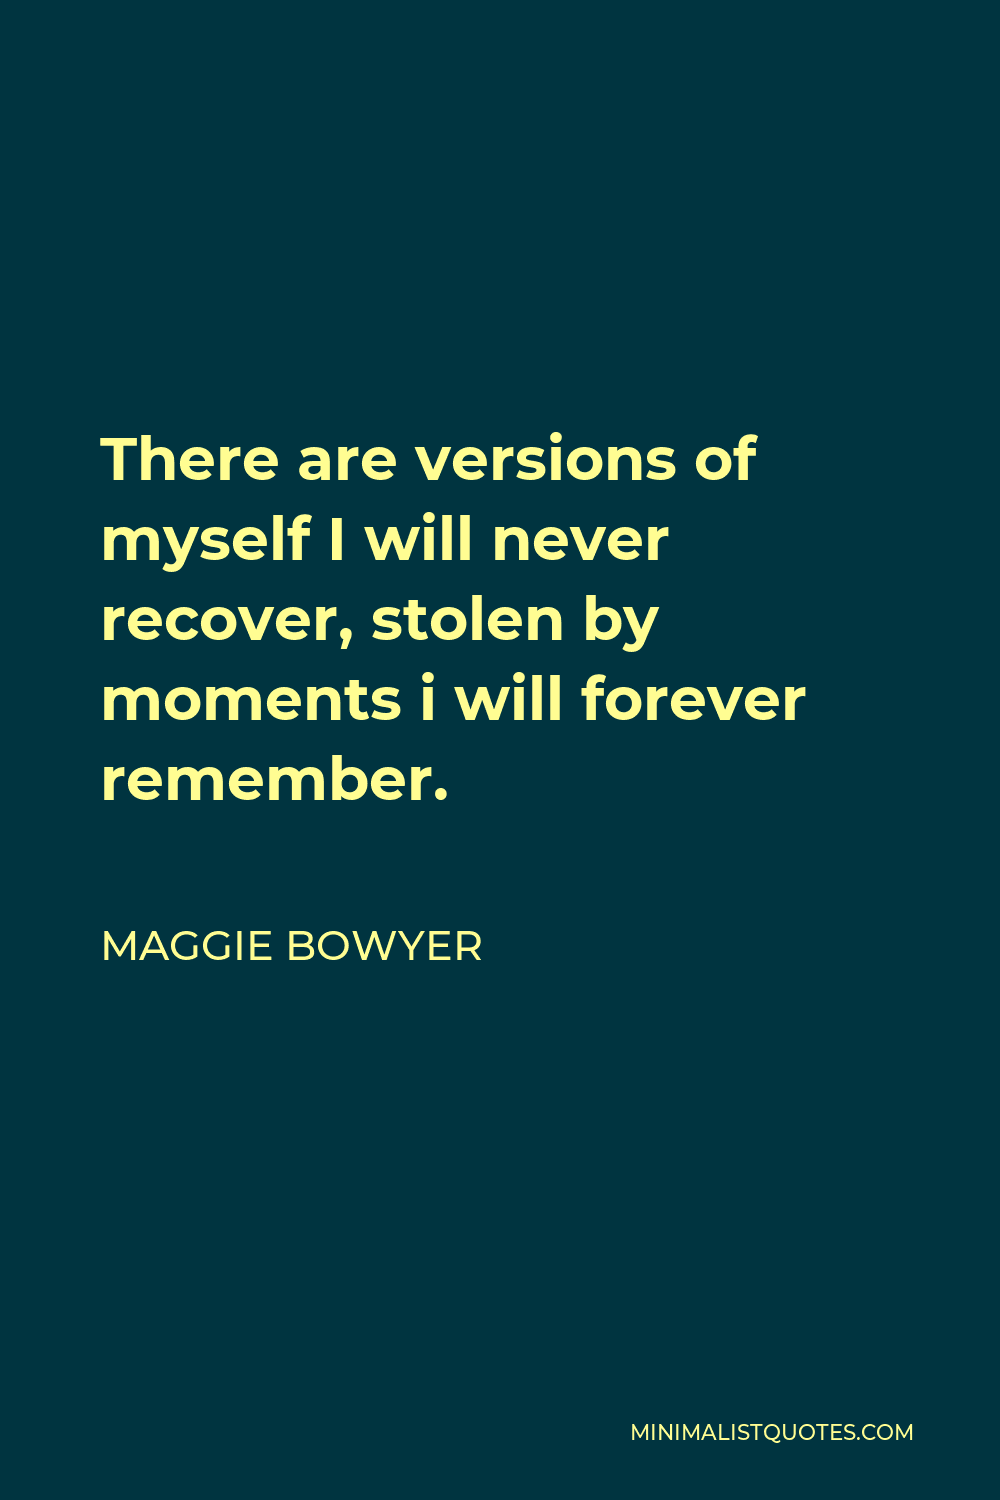 Maggie Bowyer Quote - There are versions of myself I will never recover, stolen by moments i will forever remember.